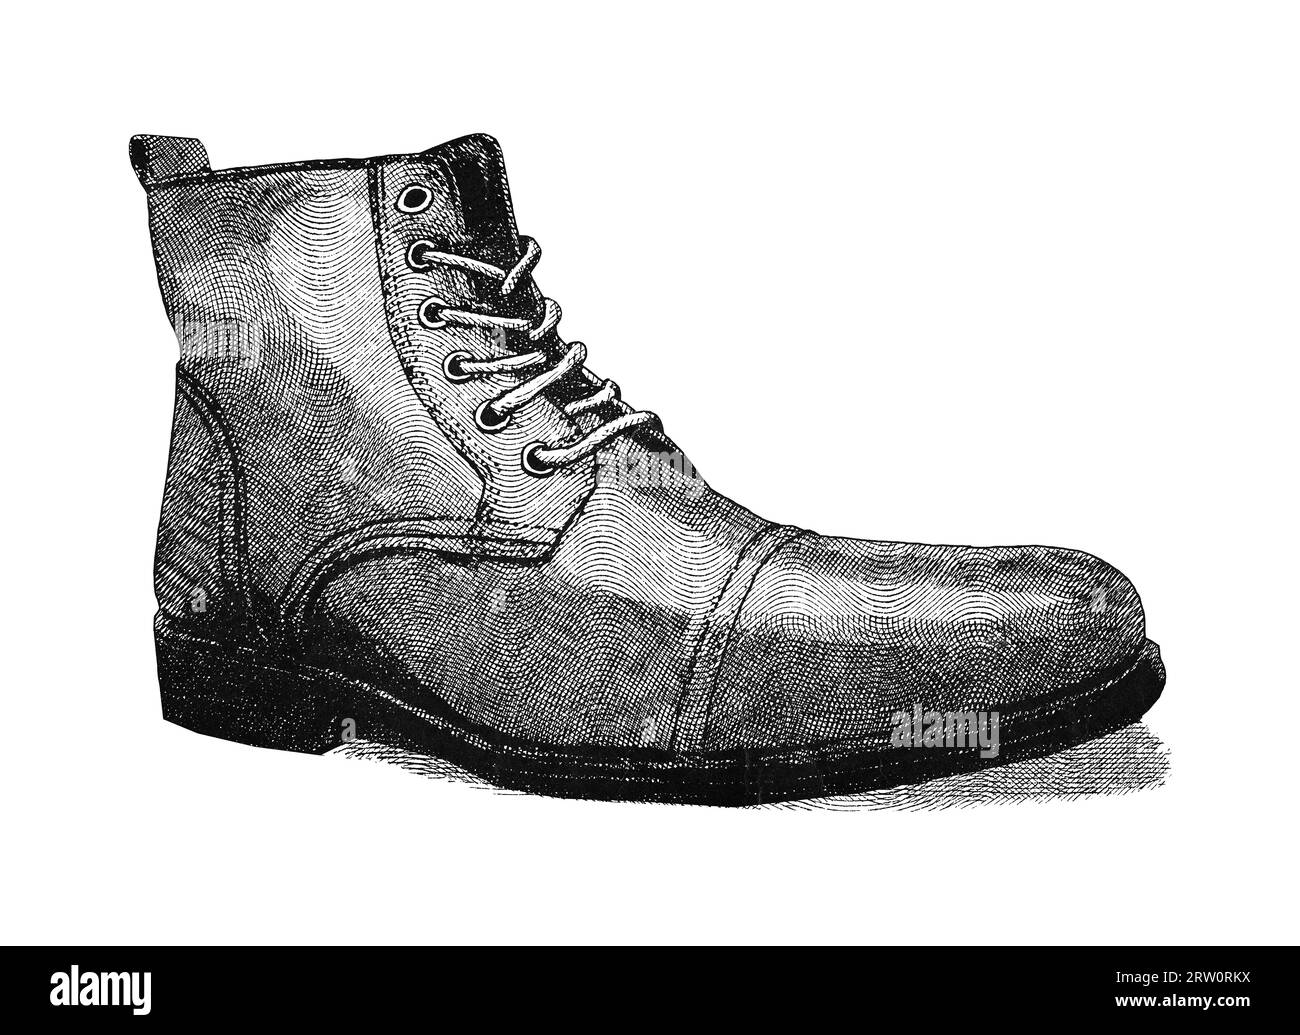 Original digital illustration of a shoe, in style of old engravings Stock Photo